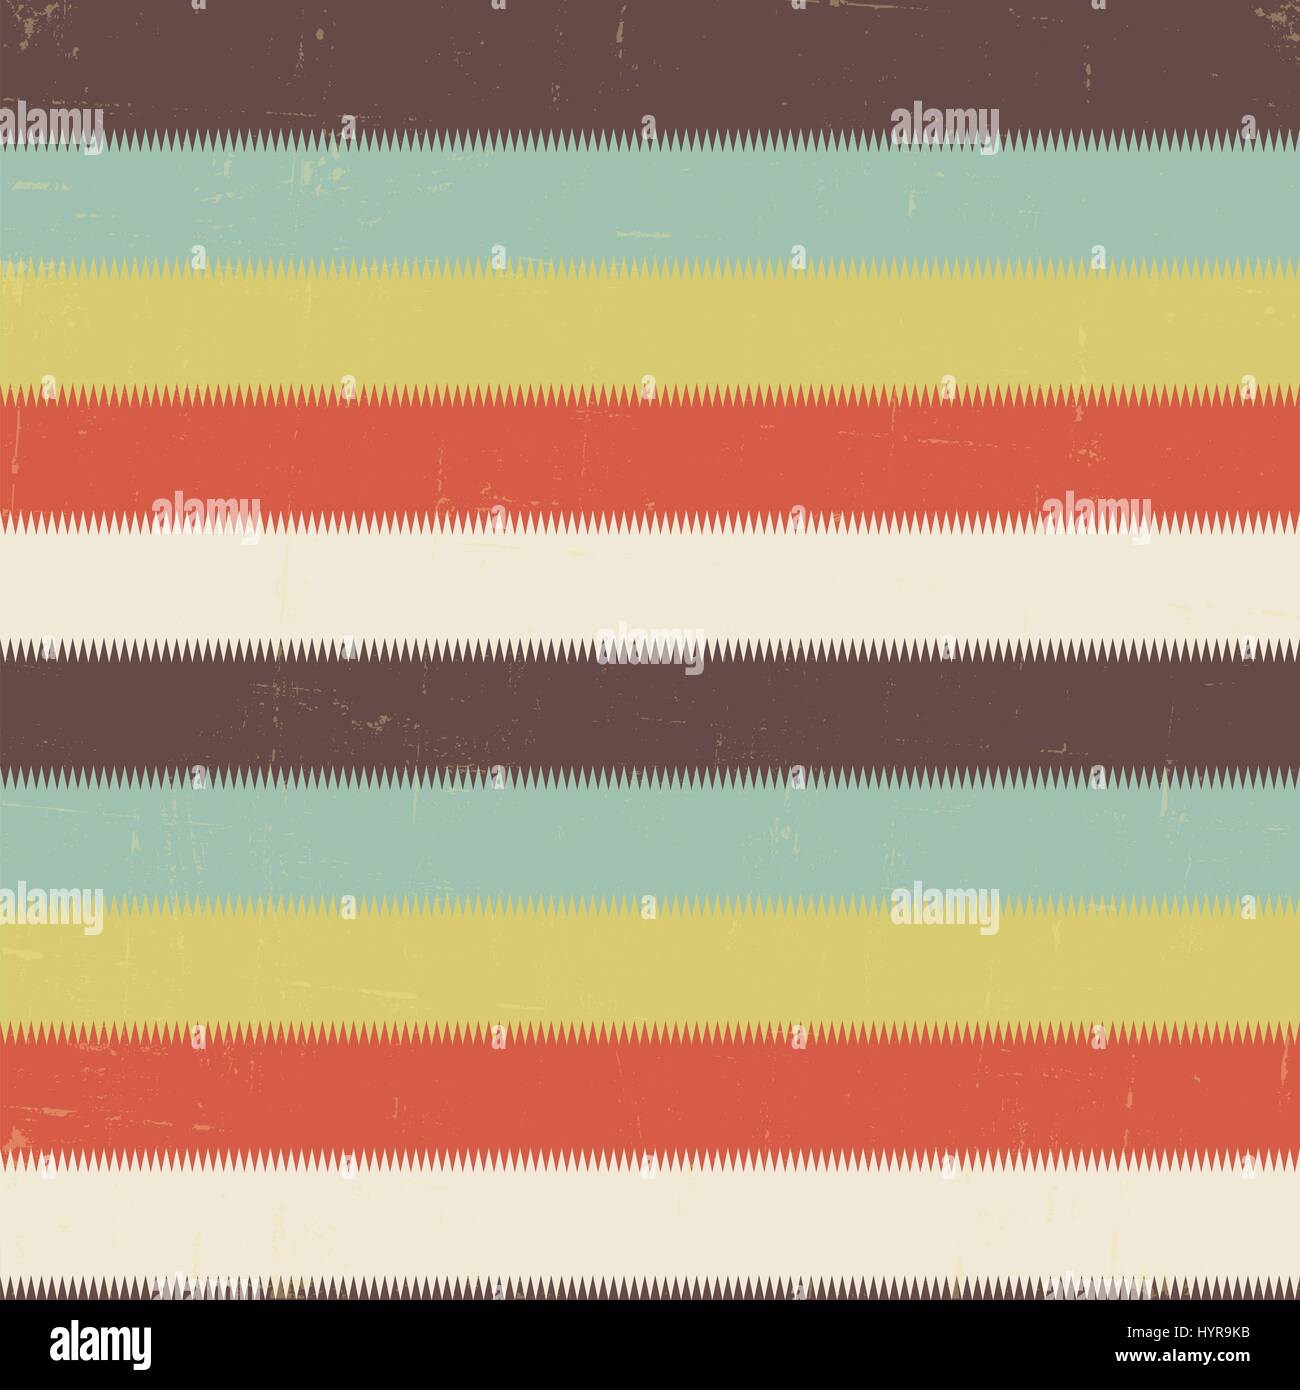 Tribal Ethnic textile decorative aged distressed ornamental striped seamless aztec pattern Stock Vector